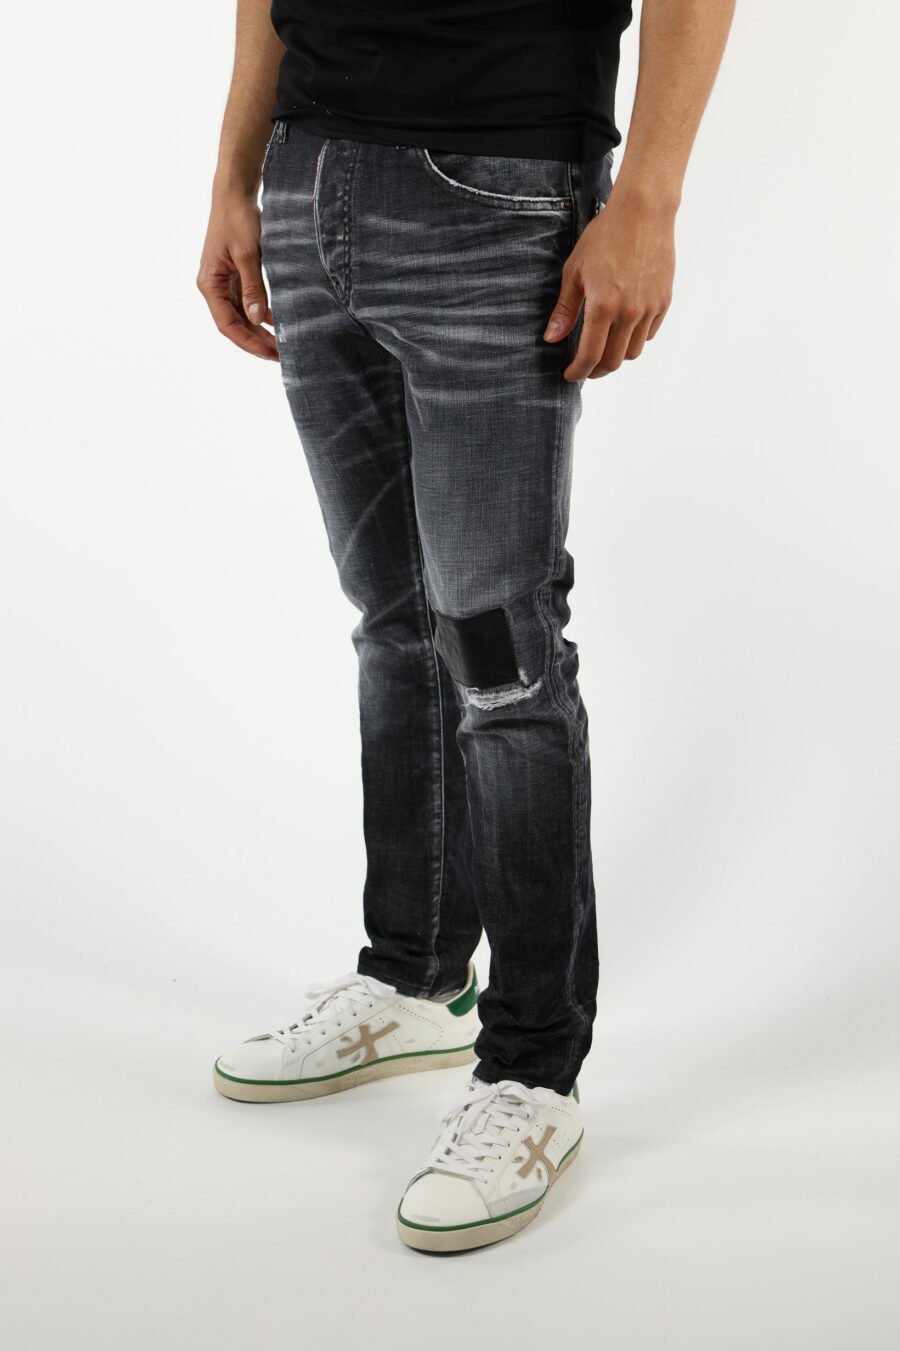 Black "skater jean" jeans with patch and semi-worn - 111290